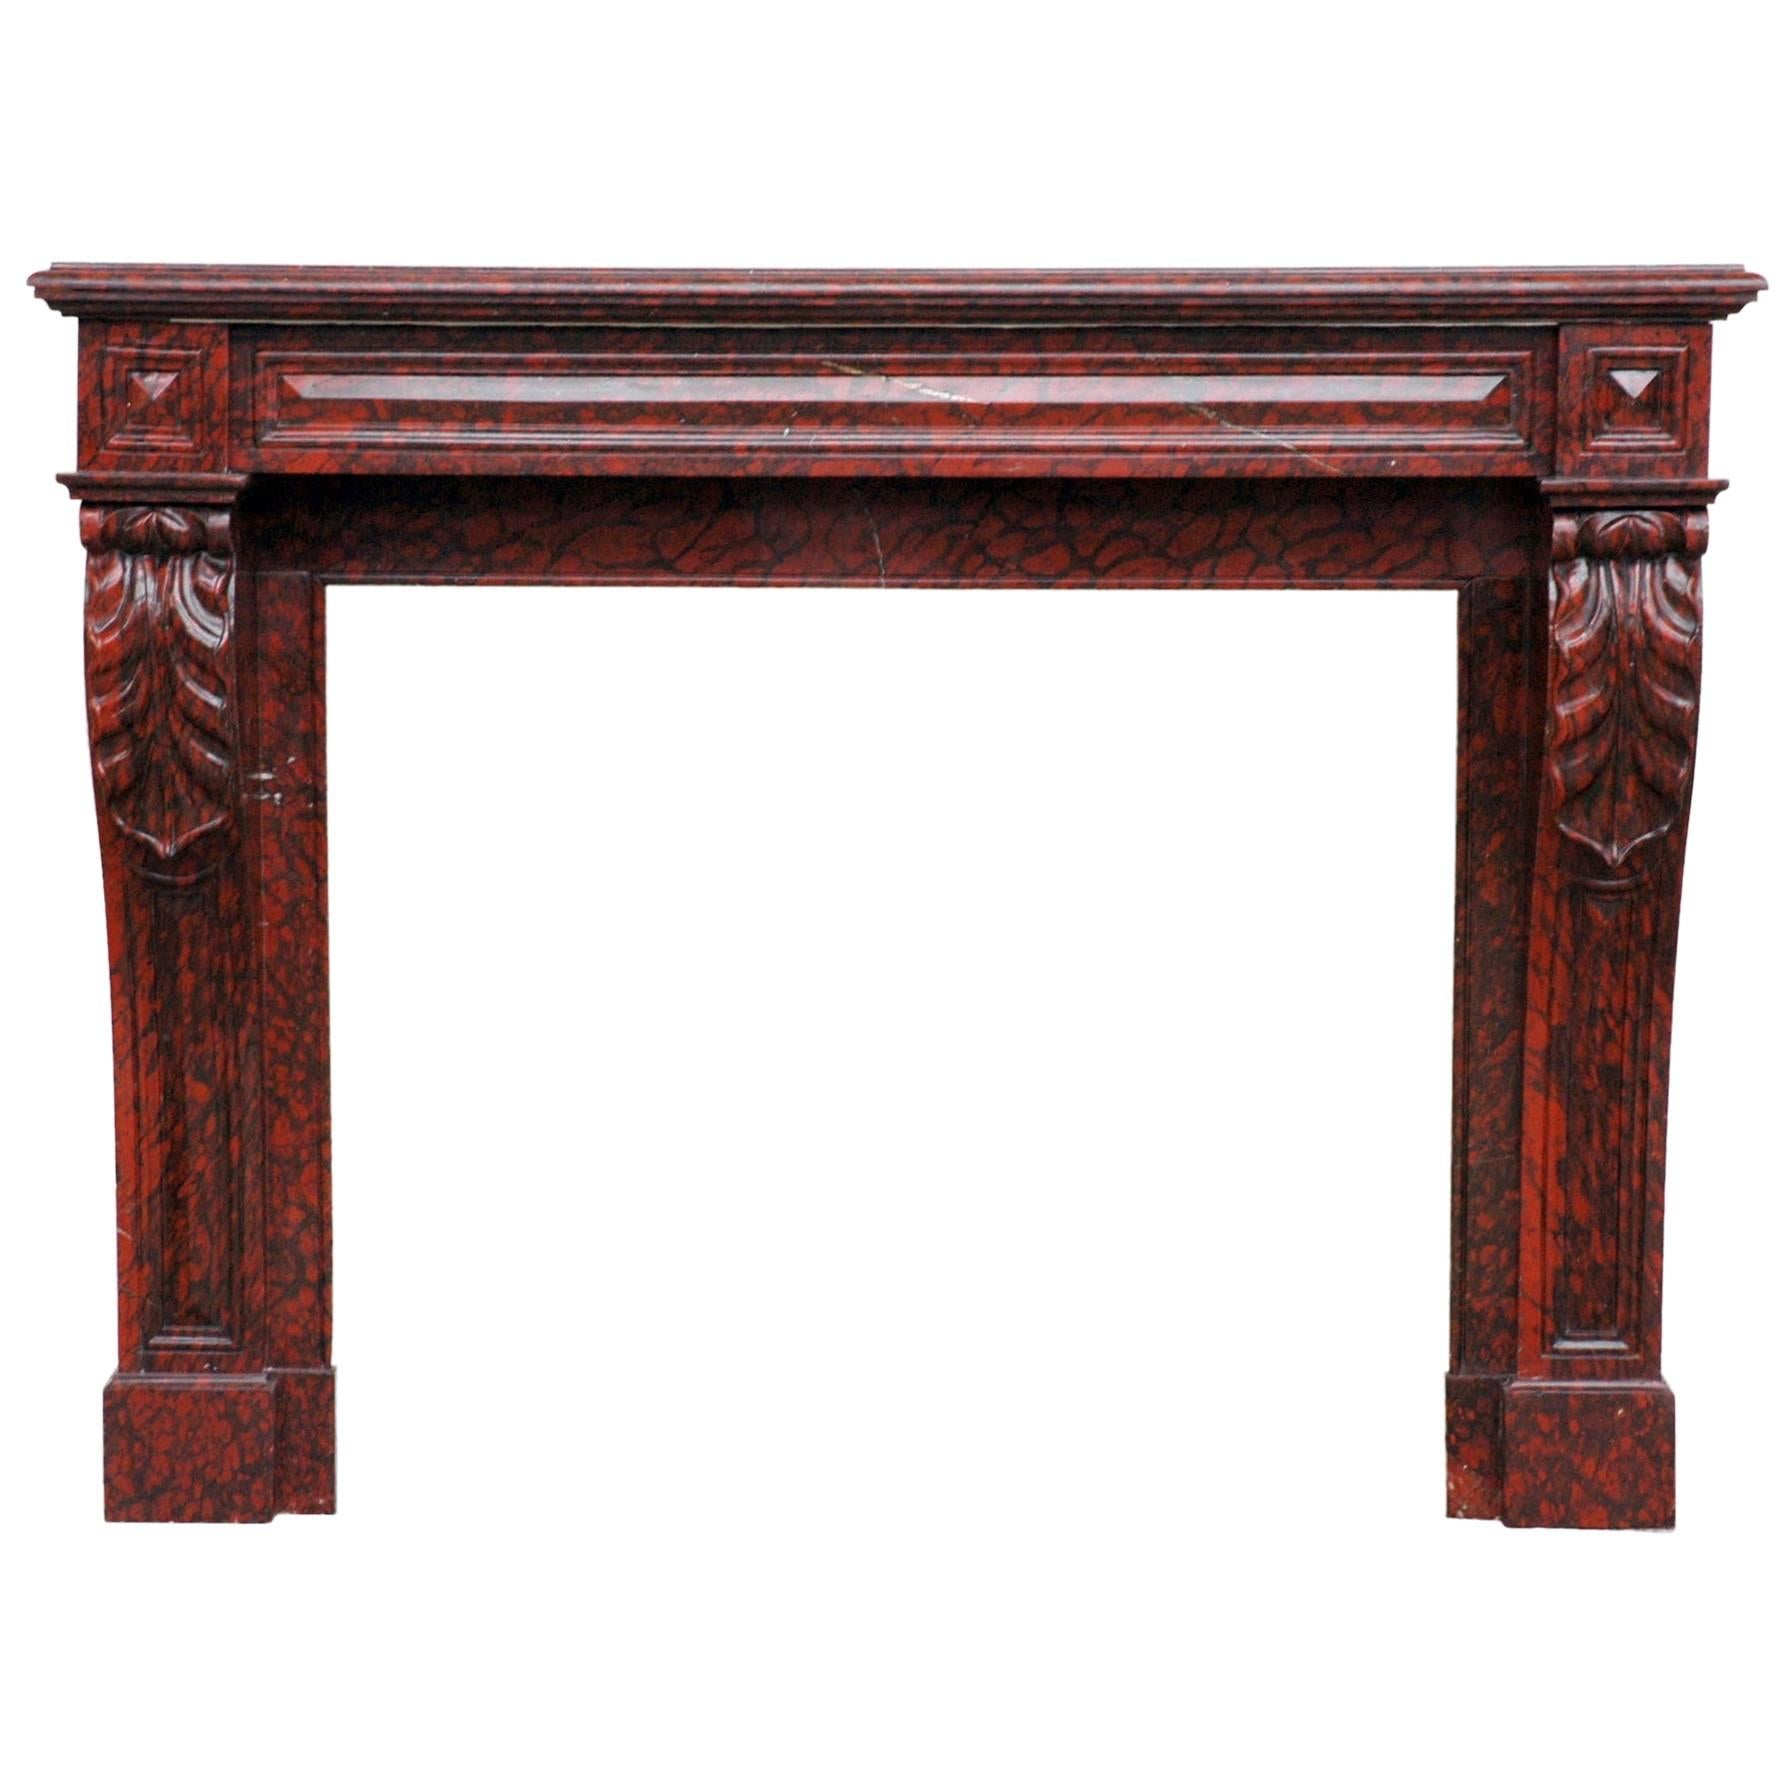 Antique Red Griotte Marble Mantel with Leaf Modillions, 19th Century For Sale